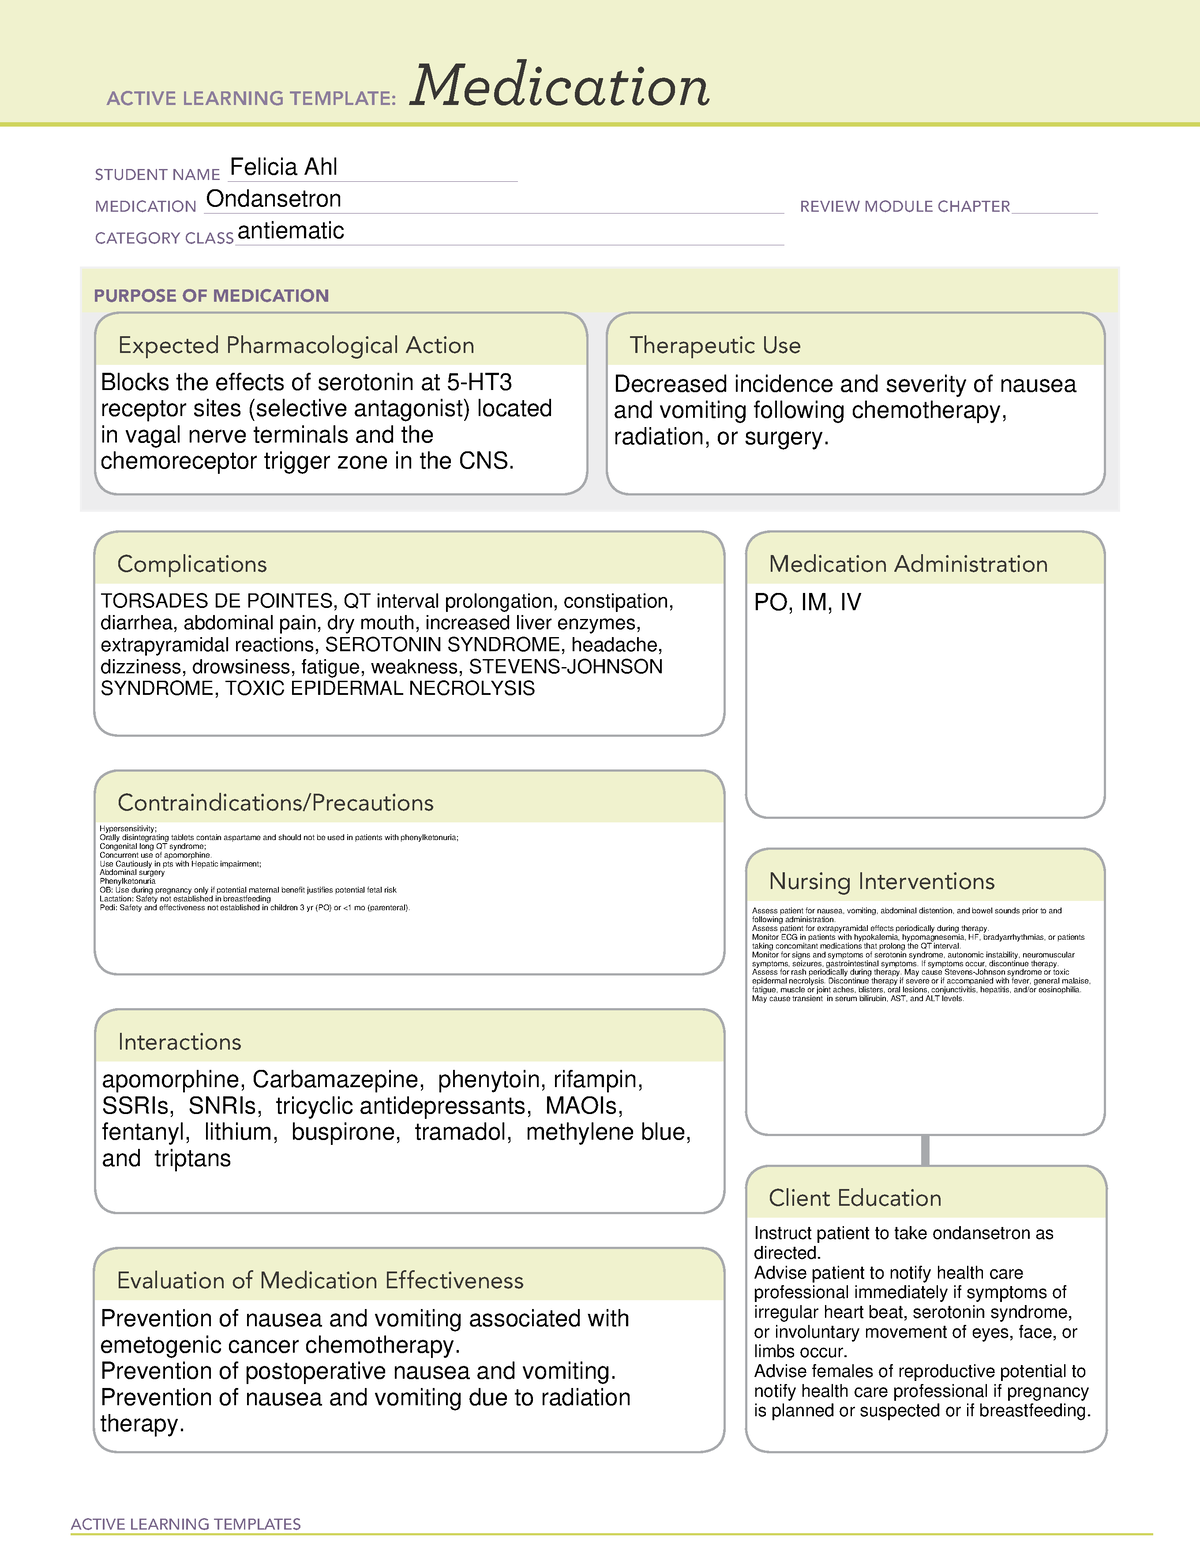 ondansetron-active-learning-template